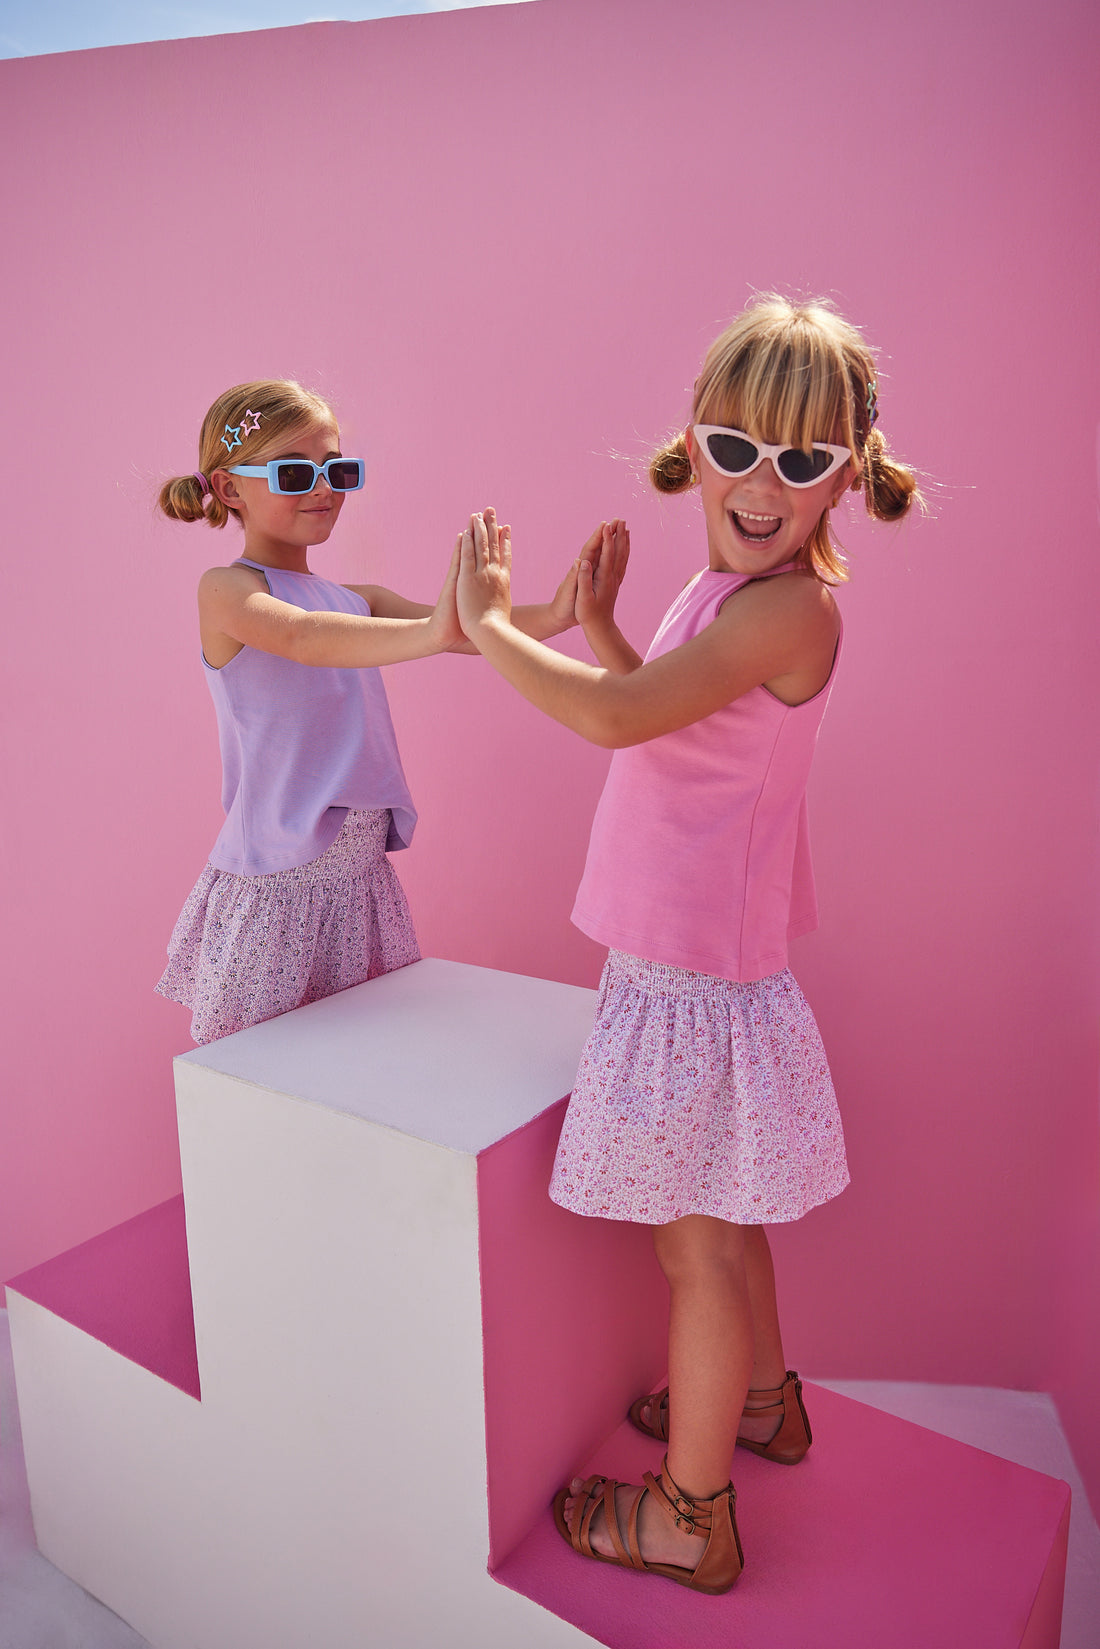 BISBY girls rocking our new Shirred Circle Skirts in our Pink and Purple Daisy patterns. The skirts have ruching along the waist for a stretchy comfortable feel and pair perfectly back with our Halter Tops in Lavender or Pink.